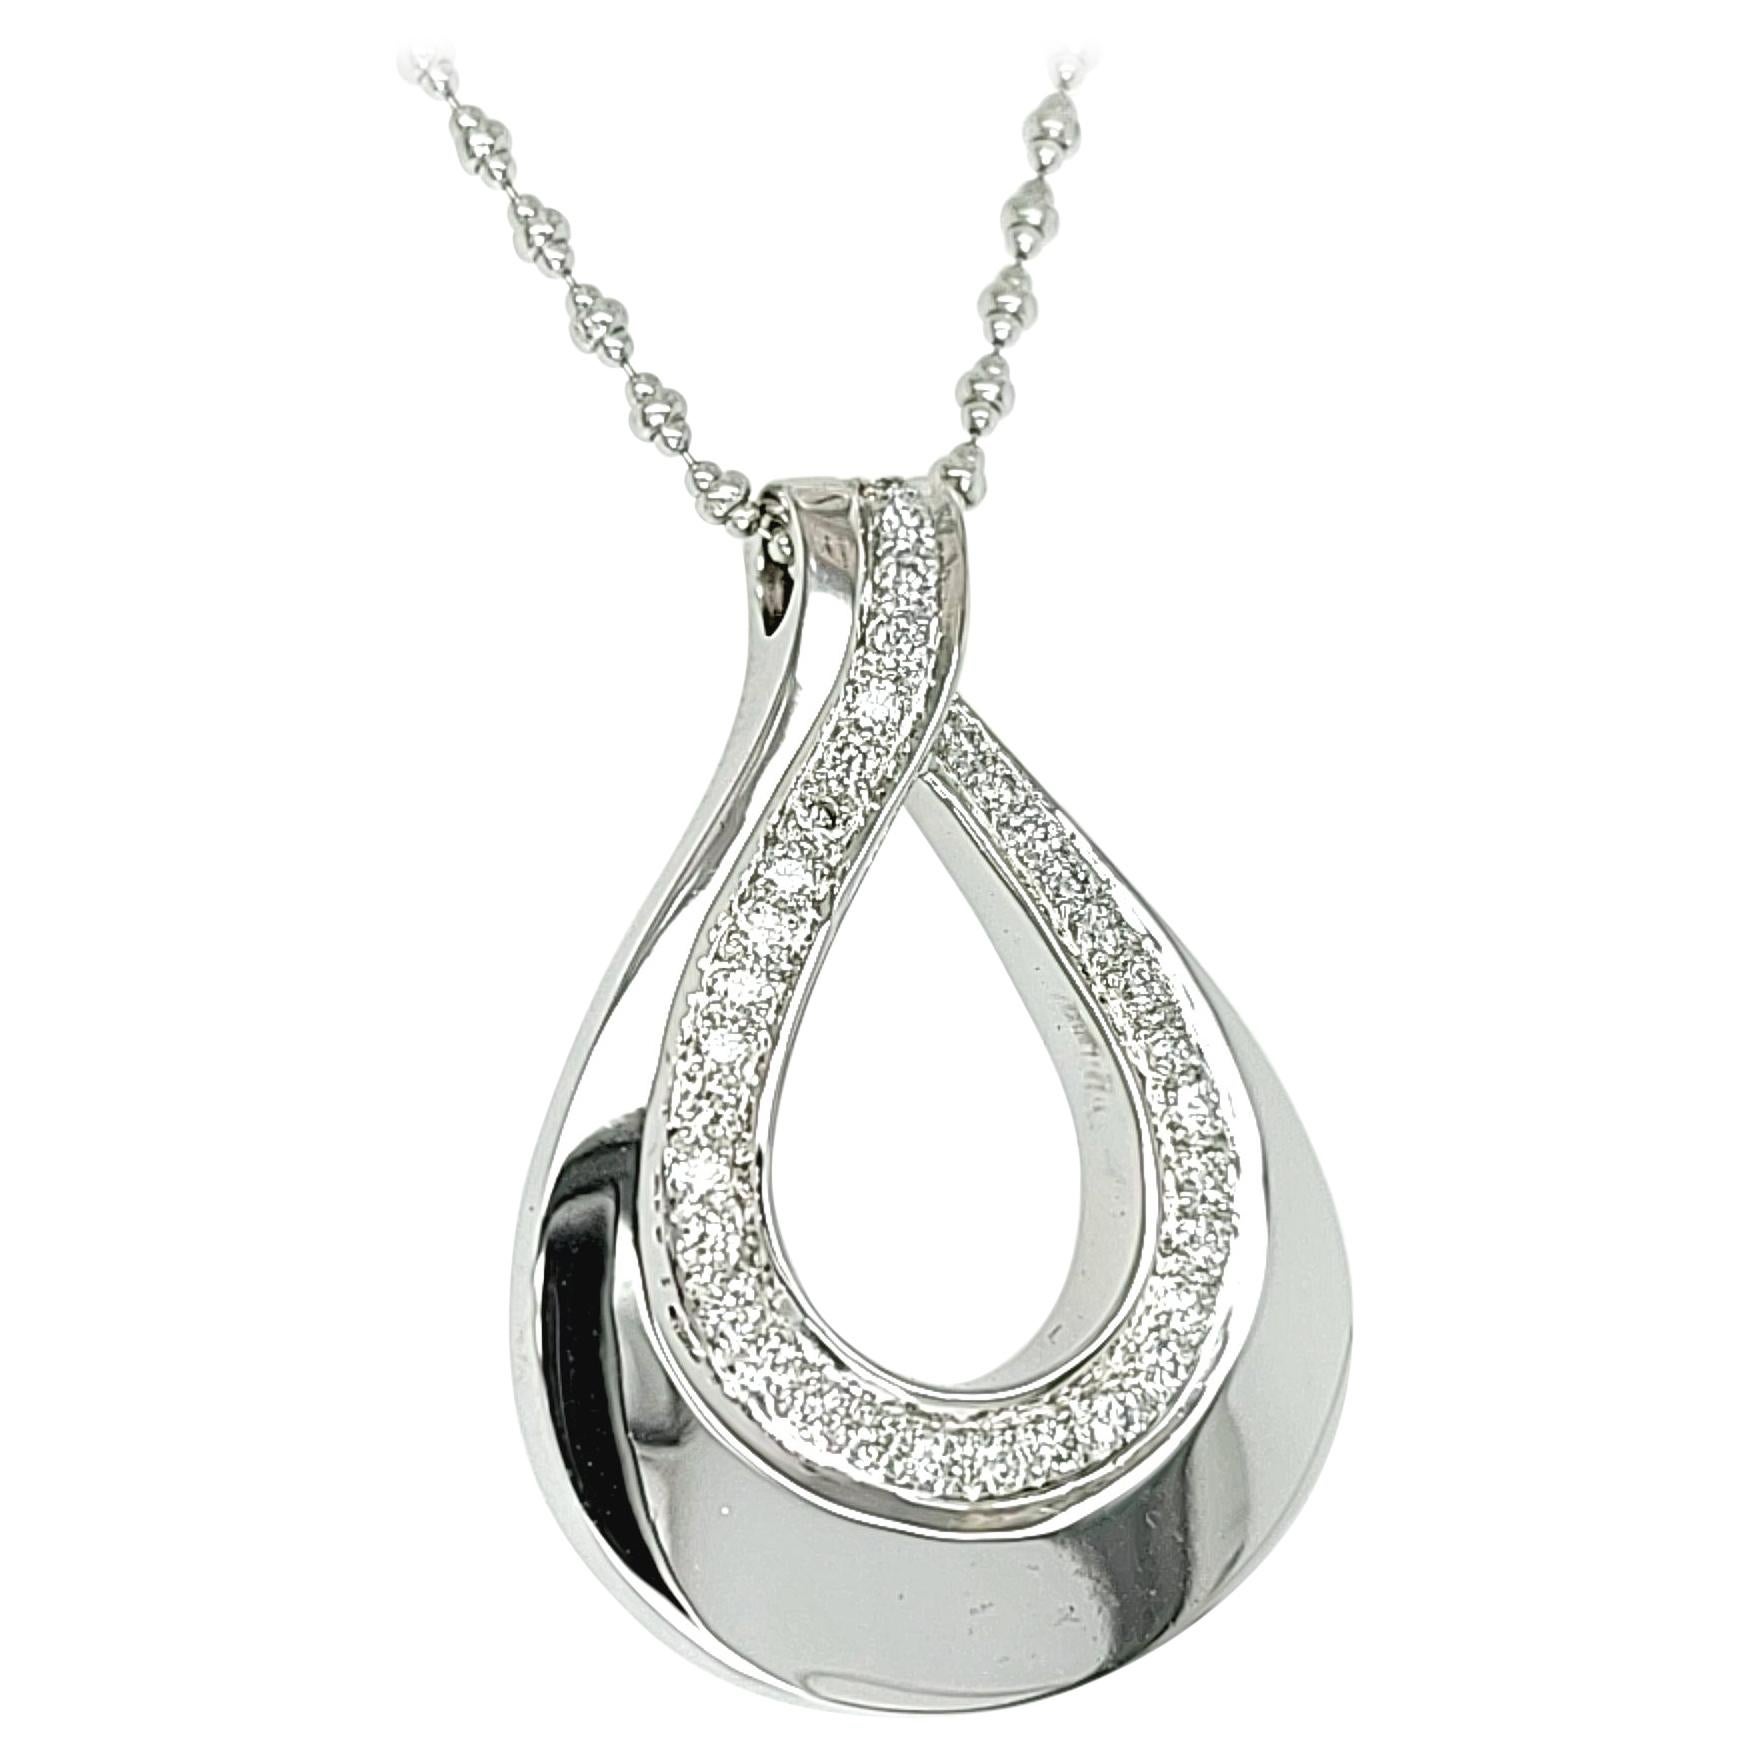 18 Karat White Gold Pear Shaped Pendant Necklace with Diamonds